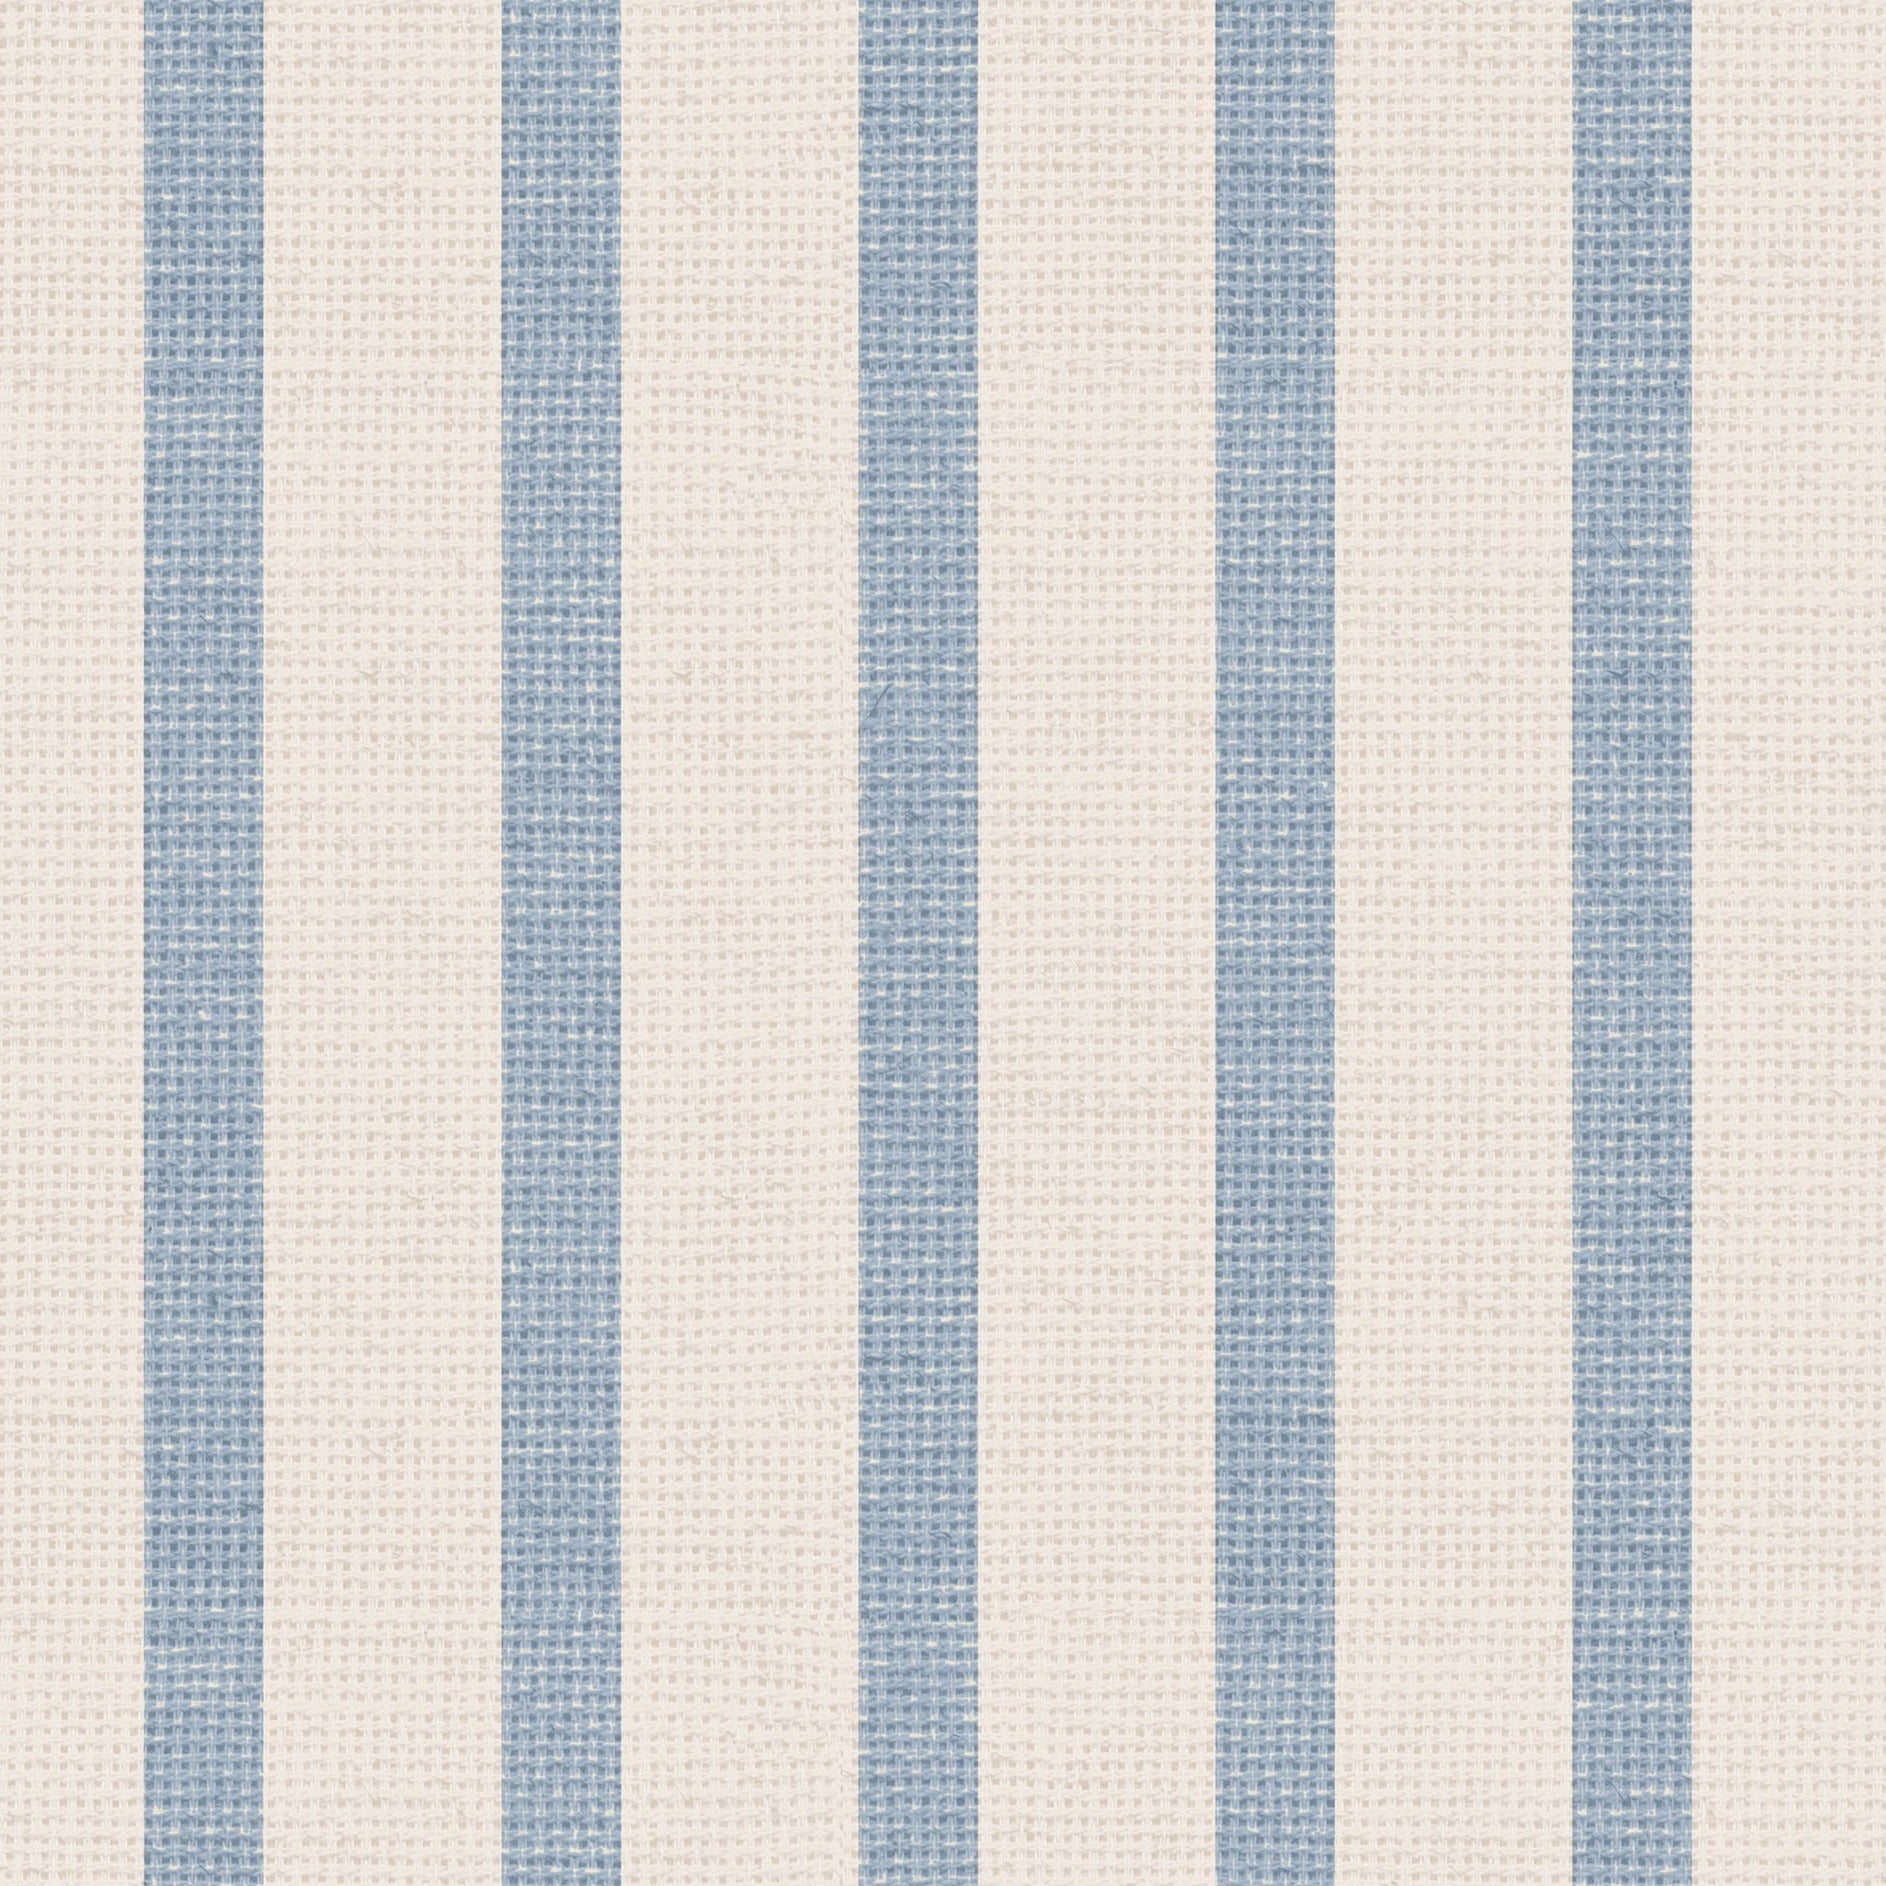 Close-up view of Fabric 10B Wallpaper displaying a pattern of vertical stripes in beige and soft blue, designed to add a calm and refreshing look to any room.